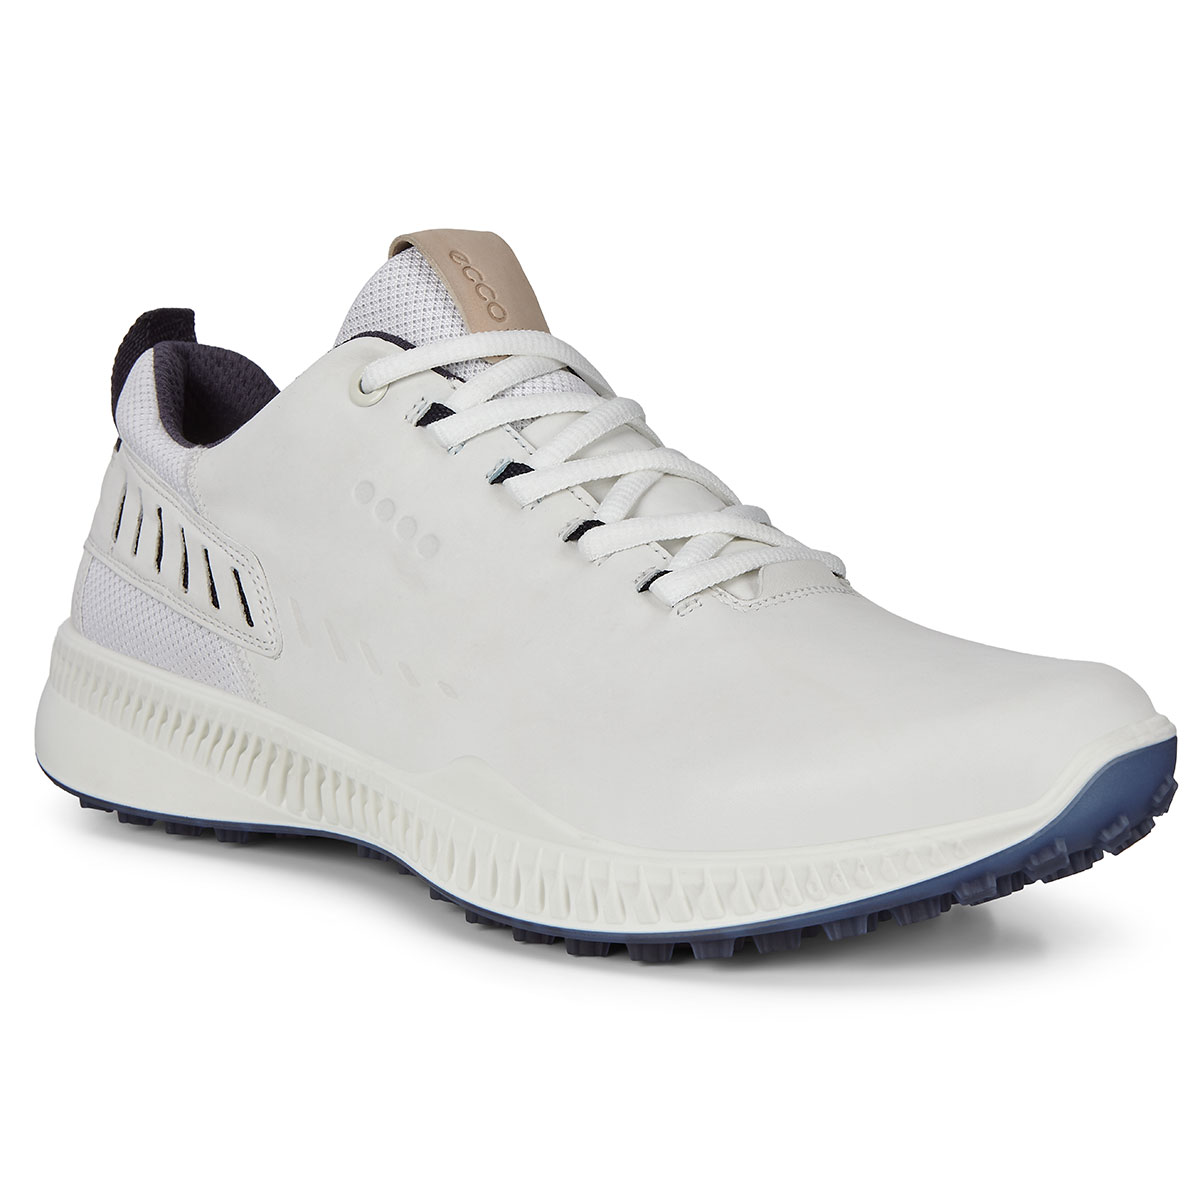 ECCO Men's S-Hybrid Spikeless Golf Shoes from american golf